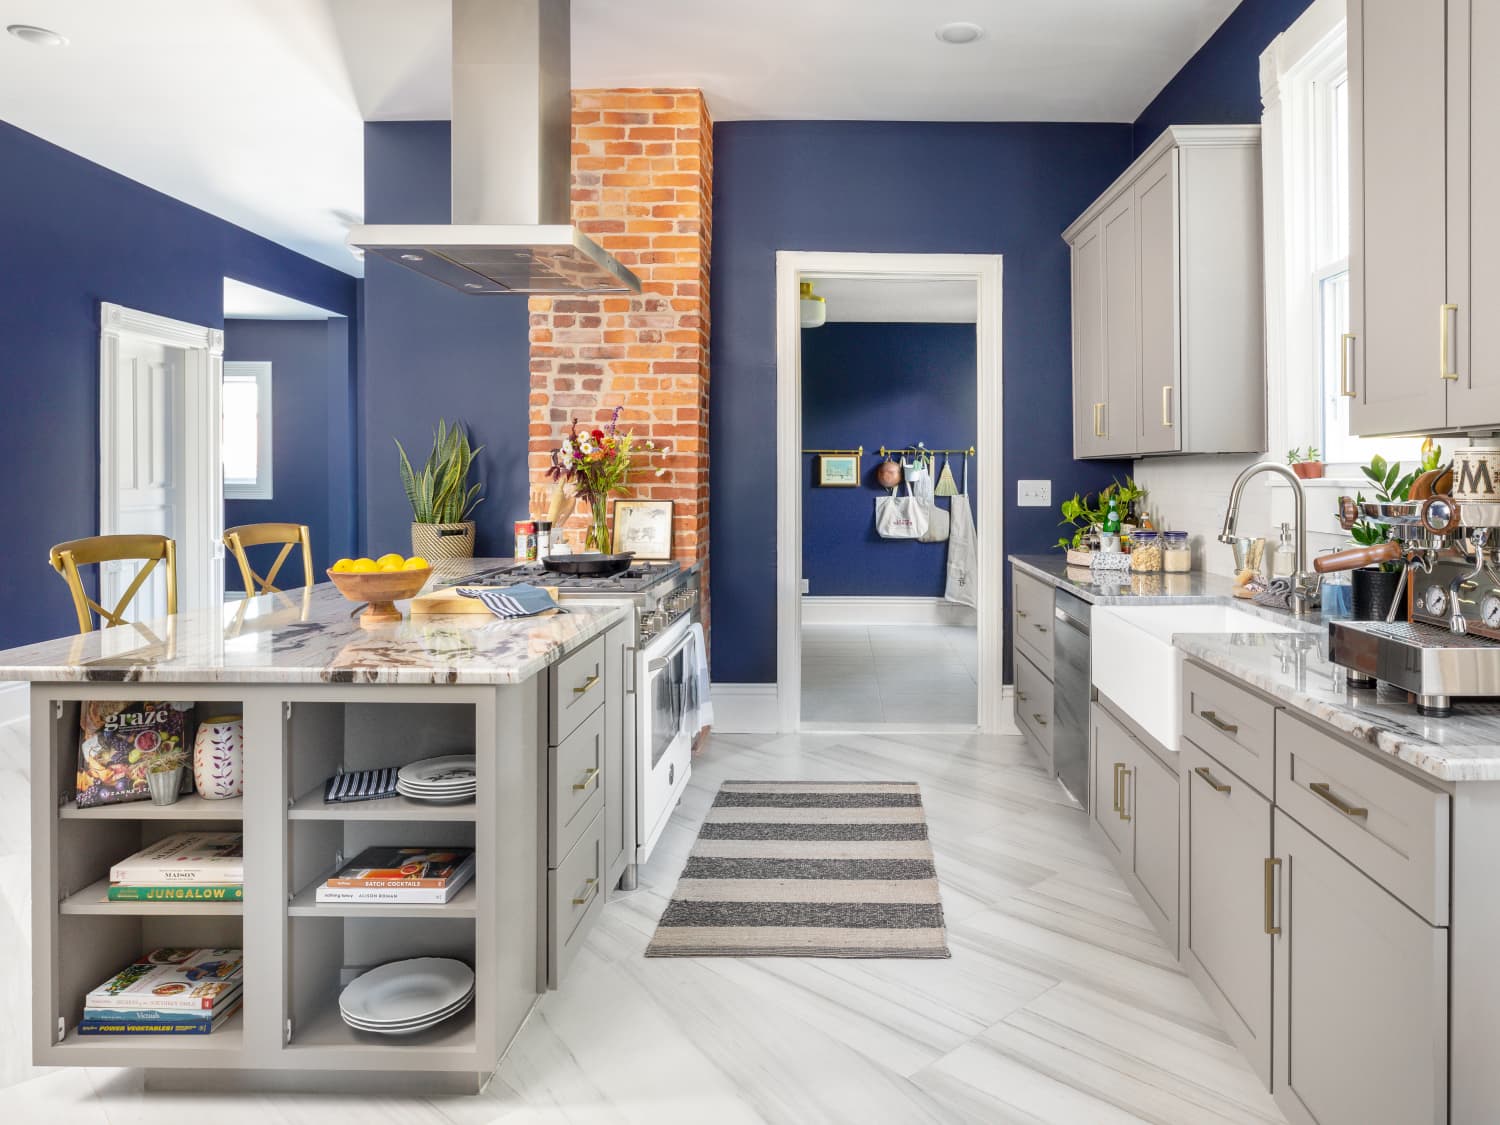 16 Kitchens that Will Make You Want to Retile Yours